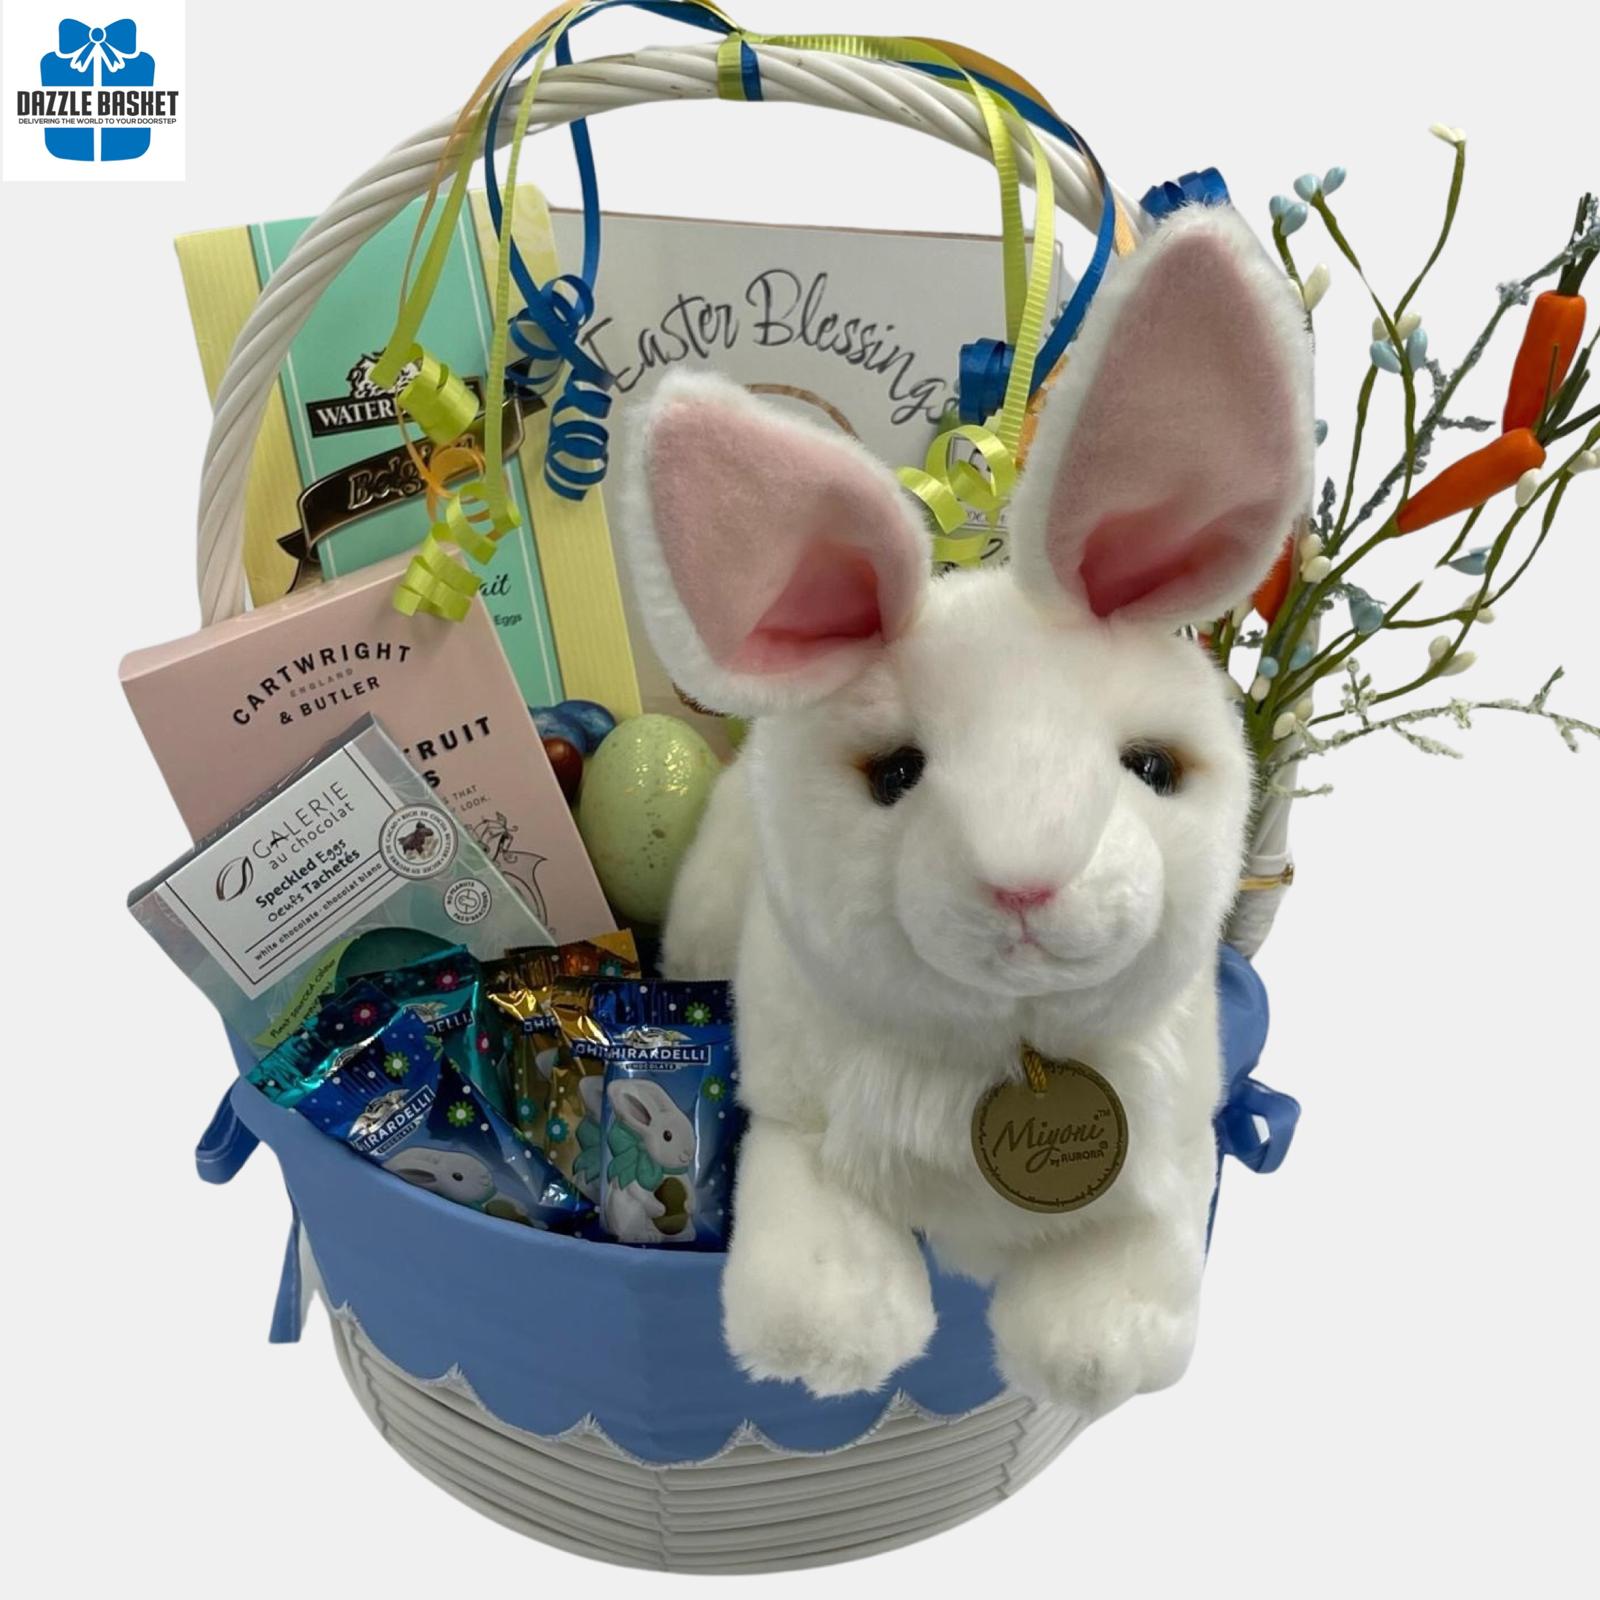 A Calgary Easter gift basket with large bunny plush toy and  themed chocolates and gourmet snacks arranged beautifully in a white basket with handle.